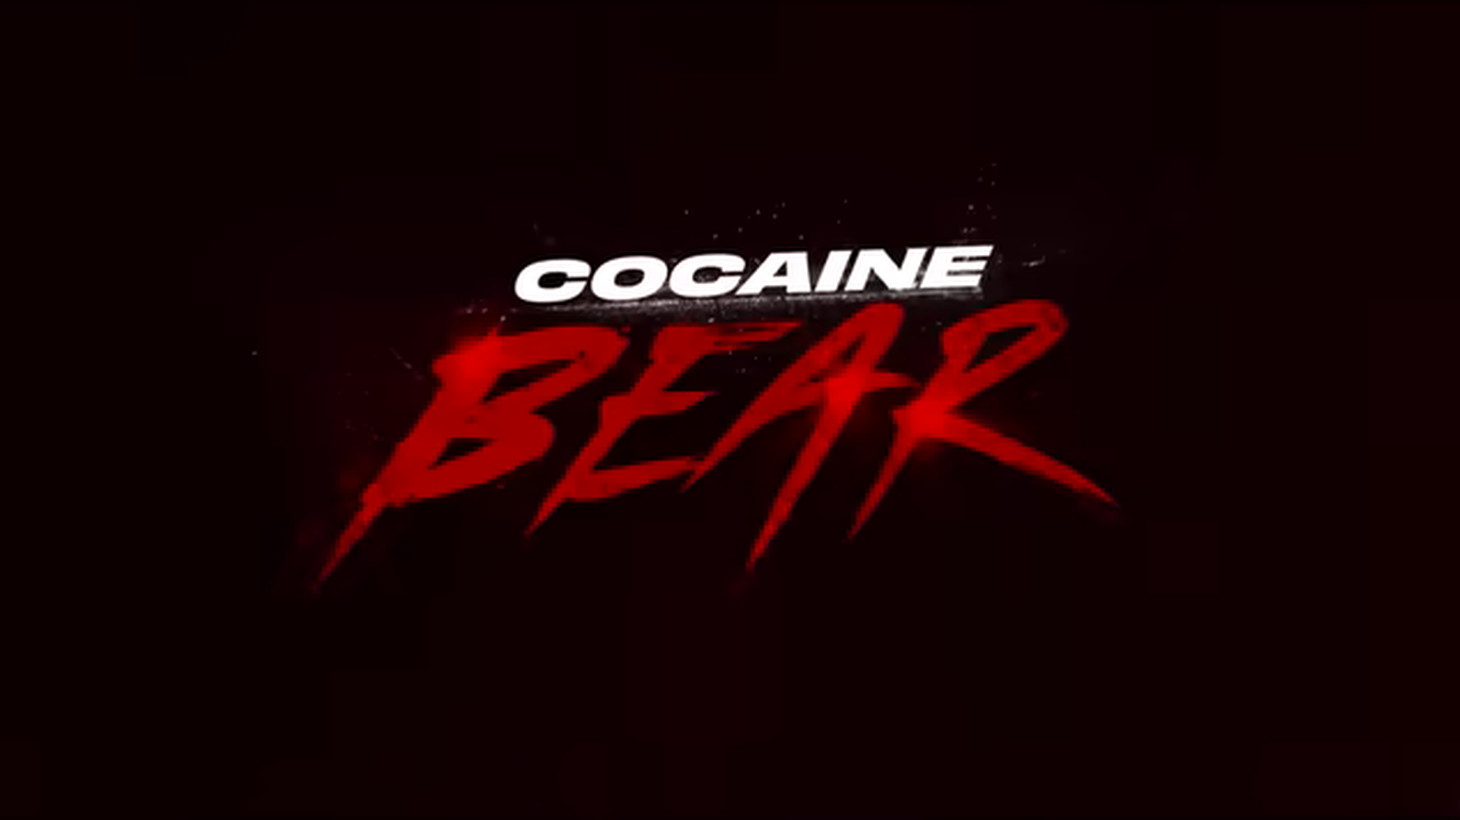 Cocaine Bear is story about a black bear that’s consumed a lot of cocaine, then goes on a rampage.